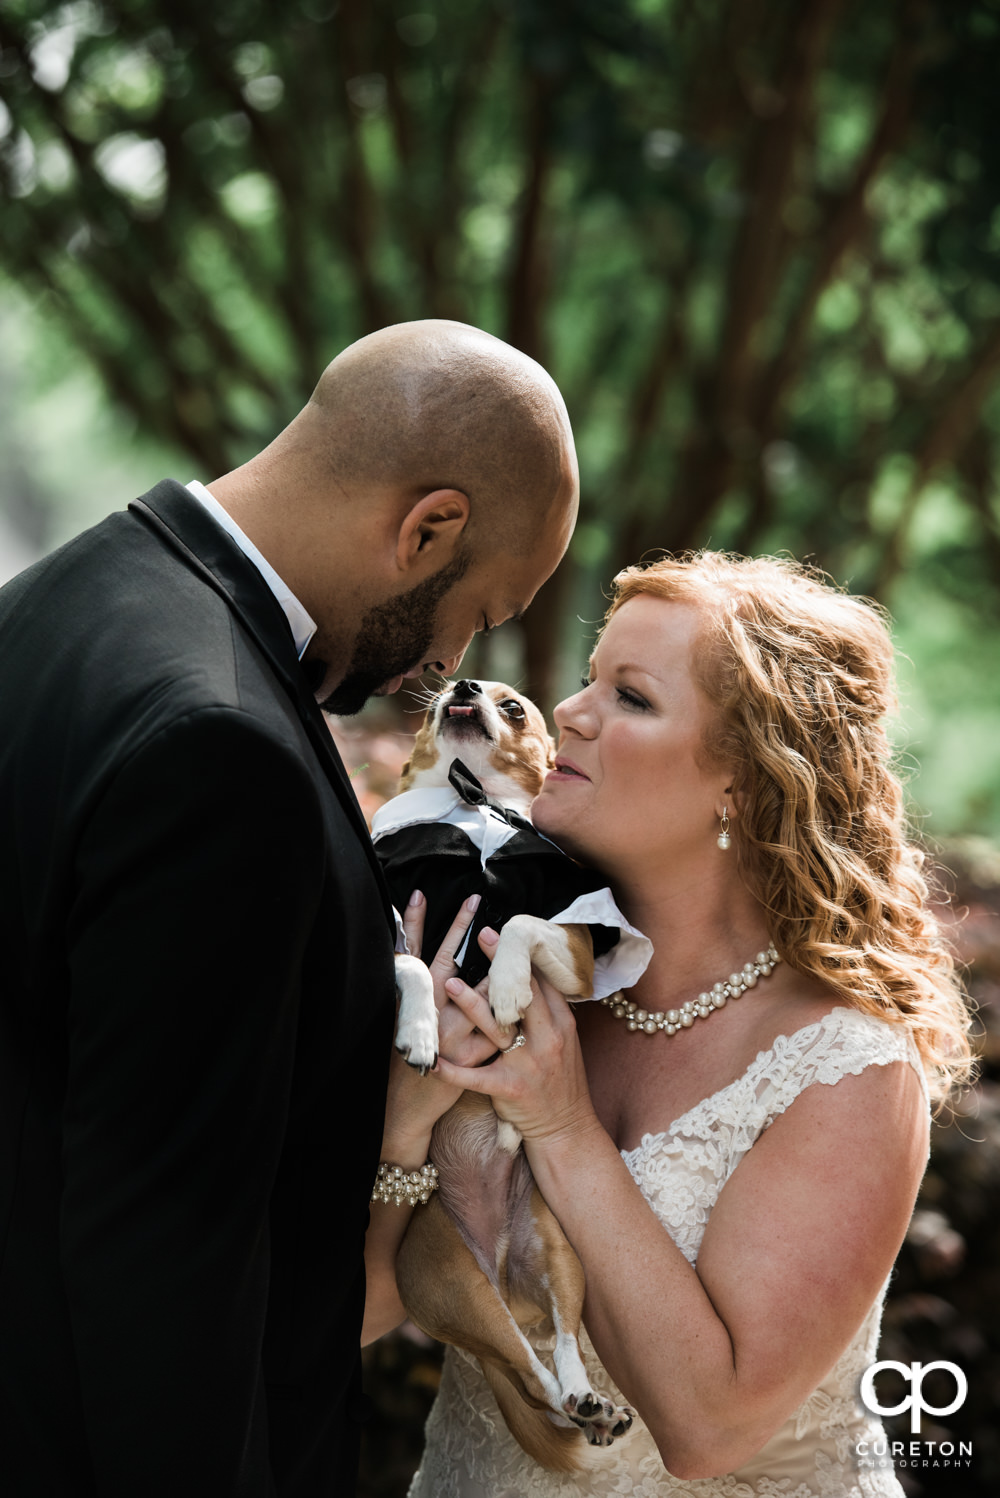 Bride and Groom with their dog before the wedding.